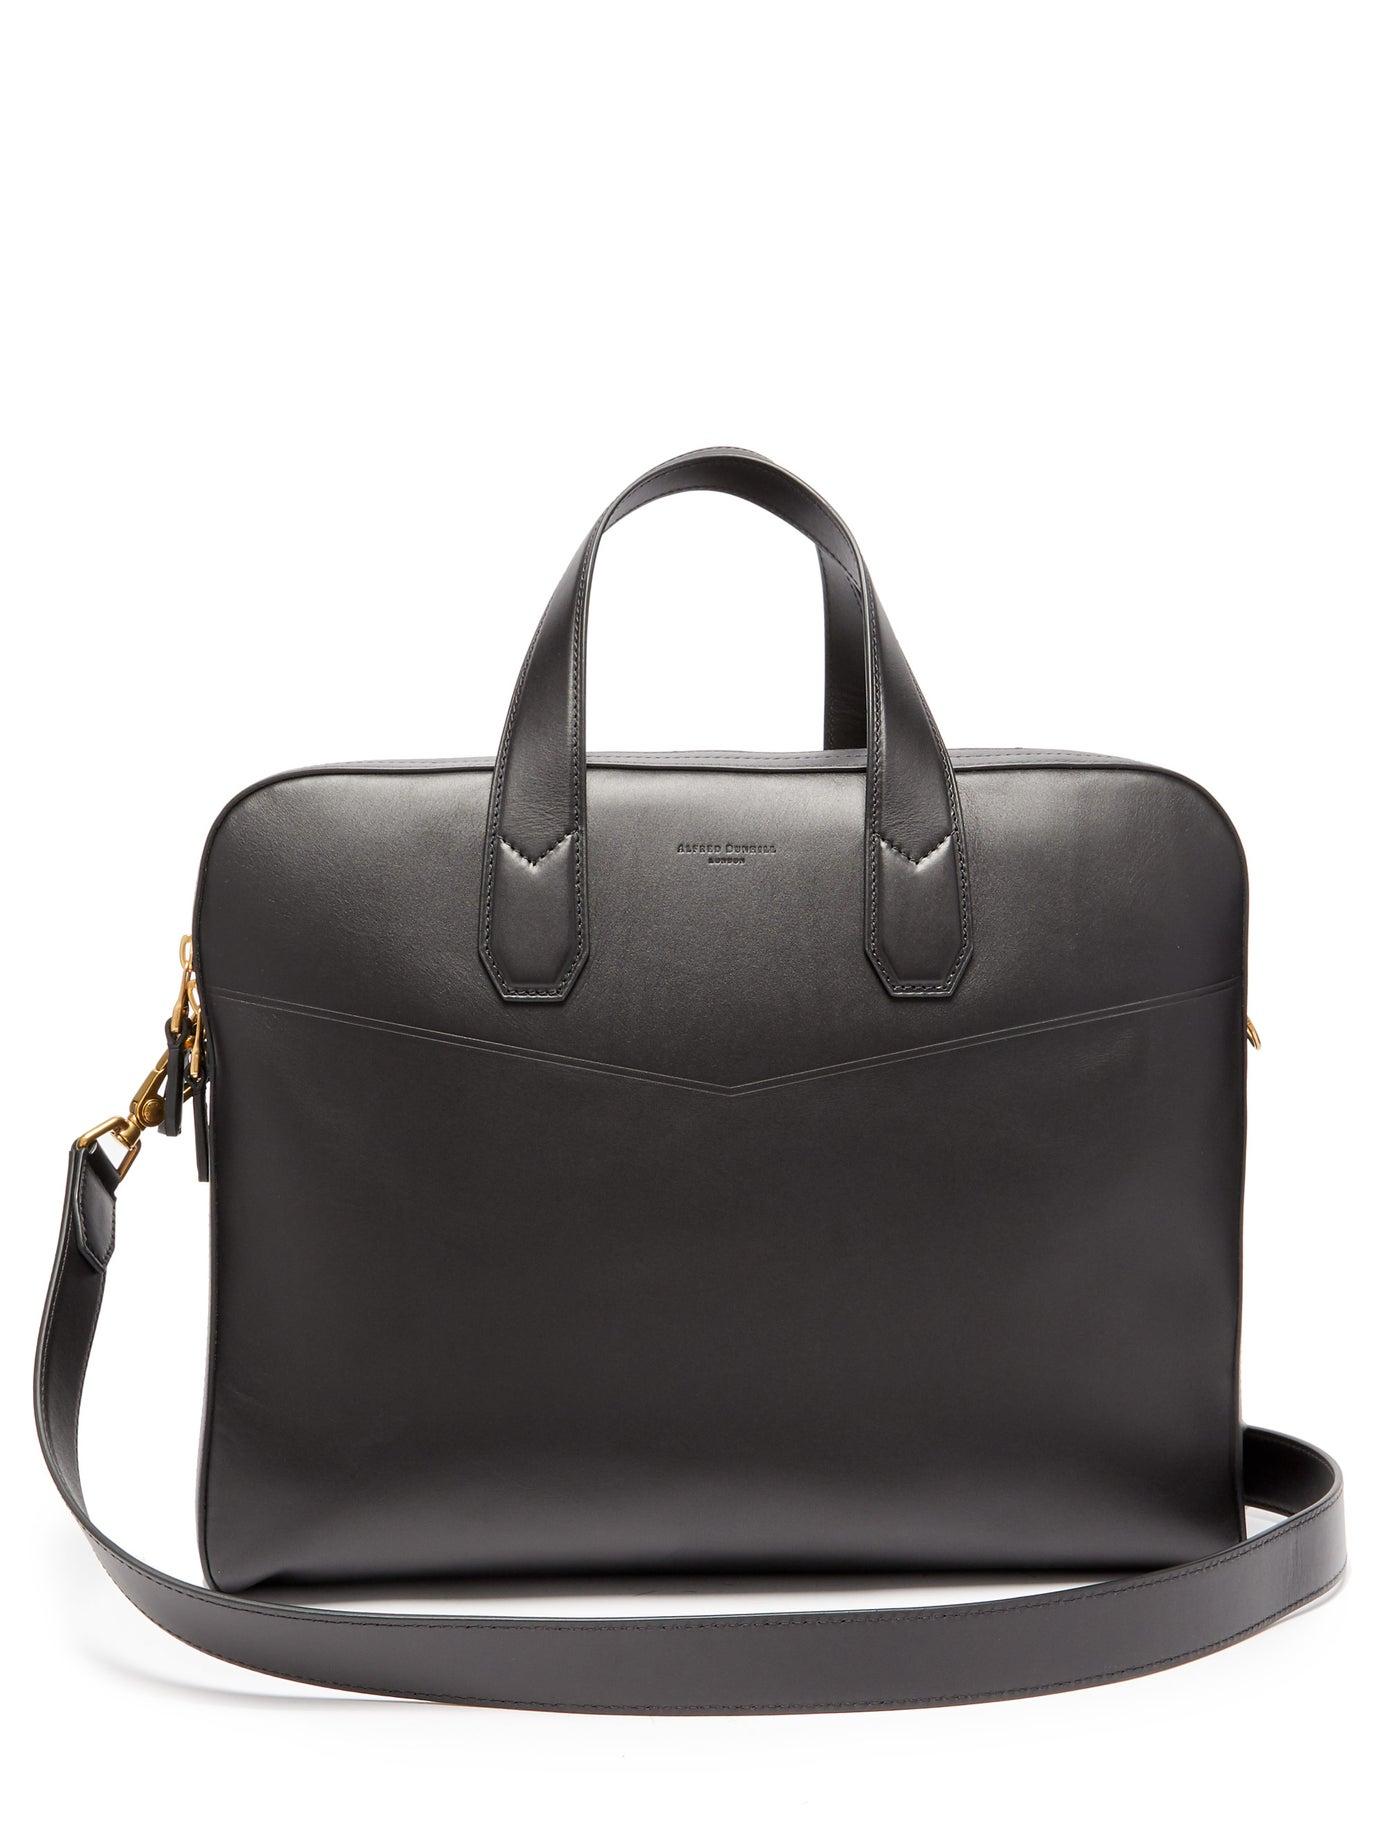 Dunhill Duke Double Document Leather Briefcase in Black for Men - Lyst